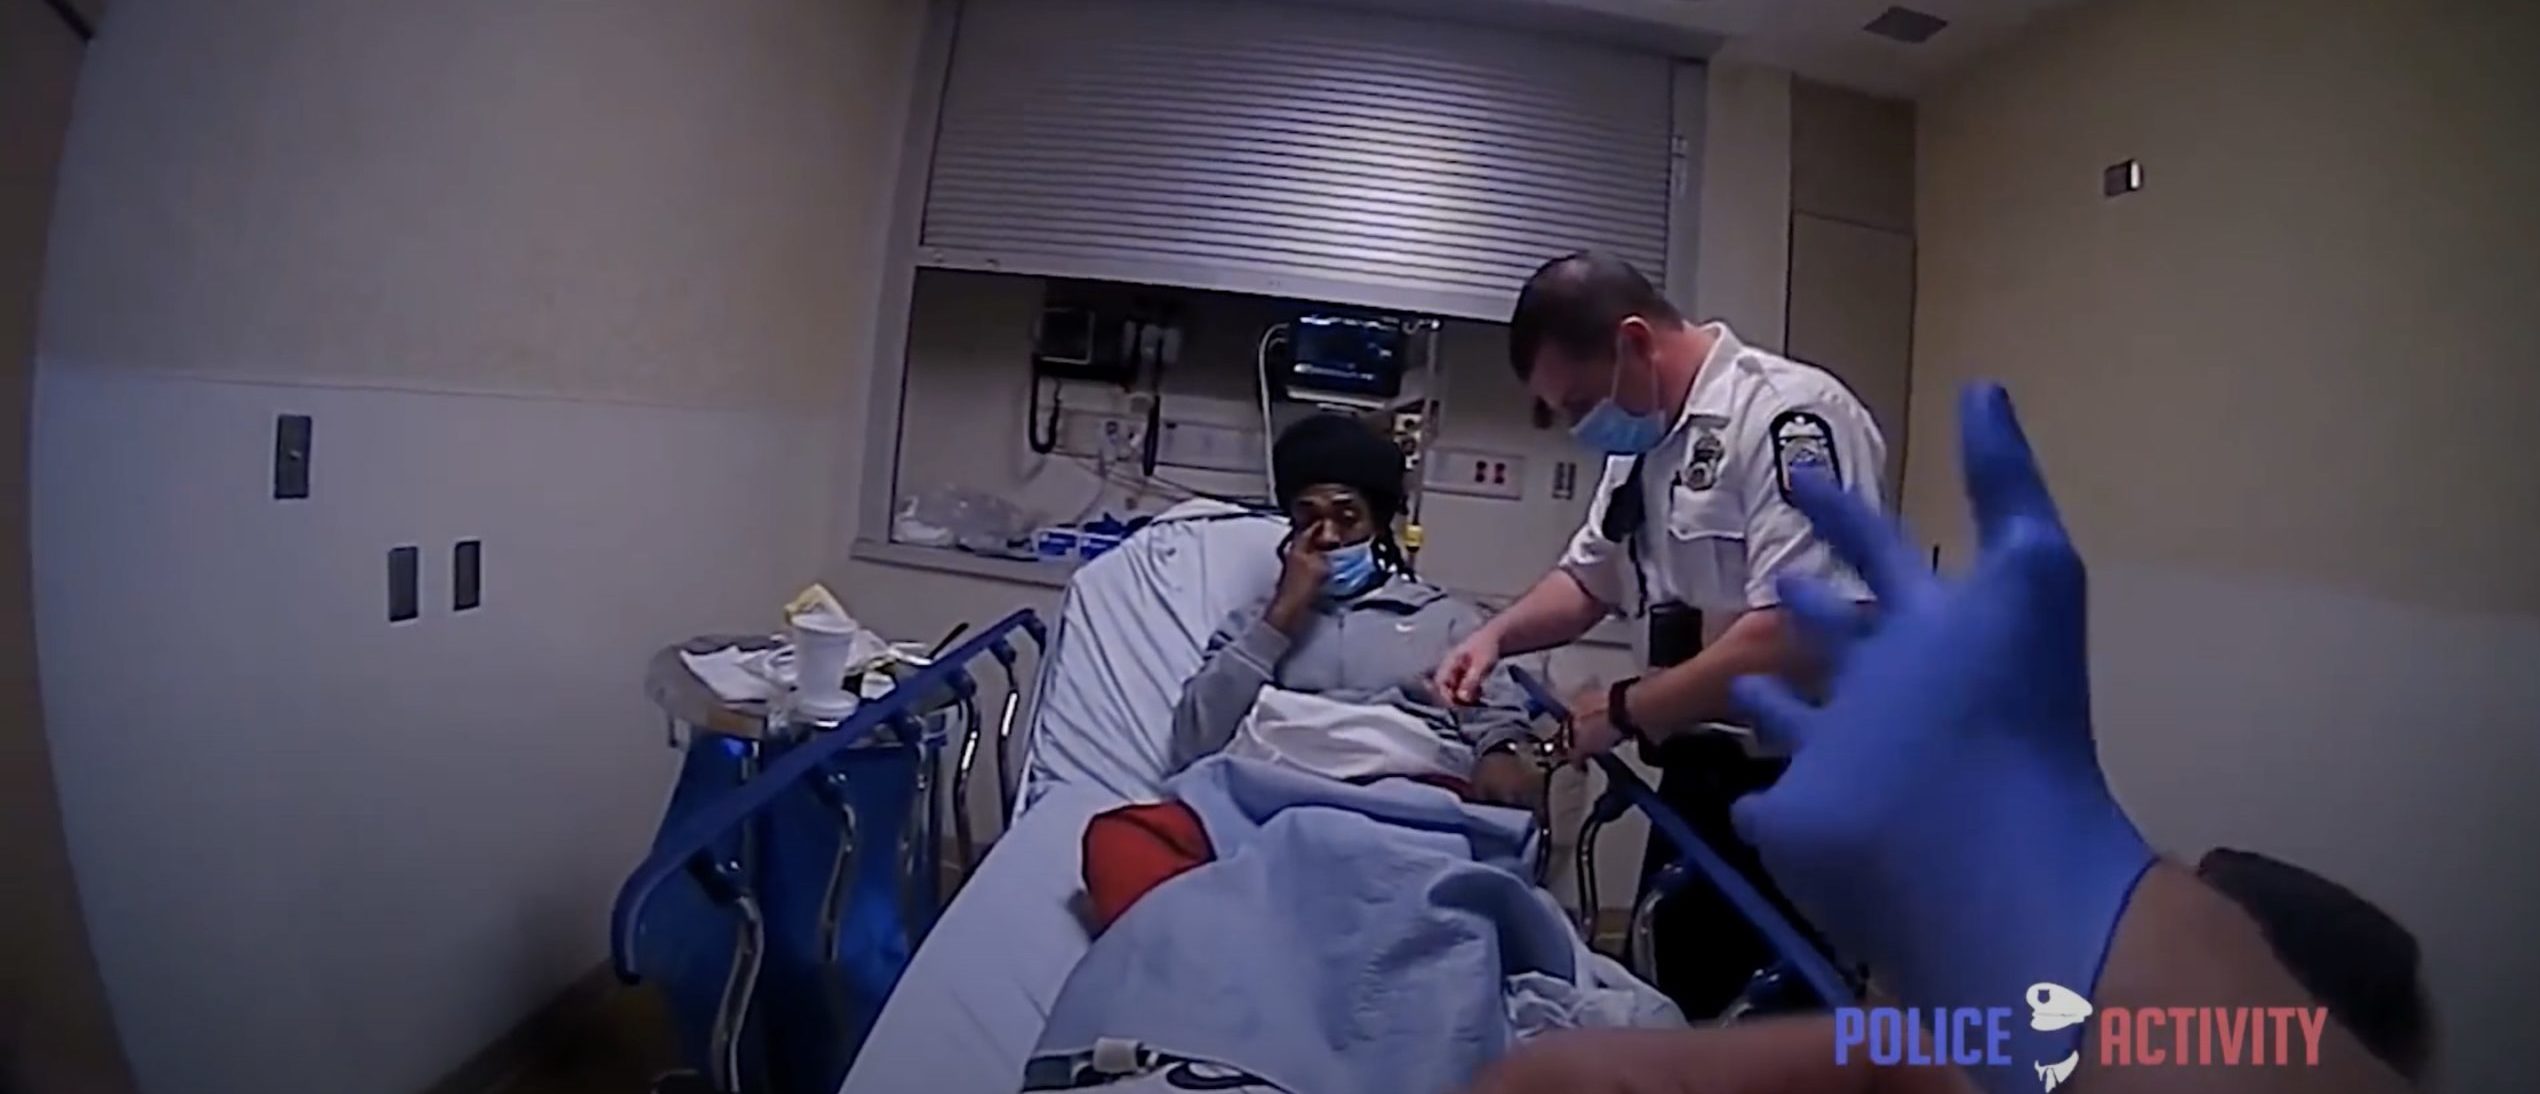 Bodycam Footage Captures Moment Man Is Fatally Shot In Hospital After Scuffle With Police The 4549